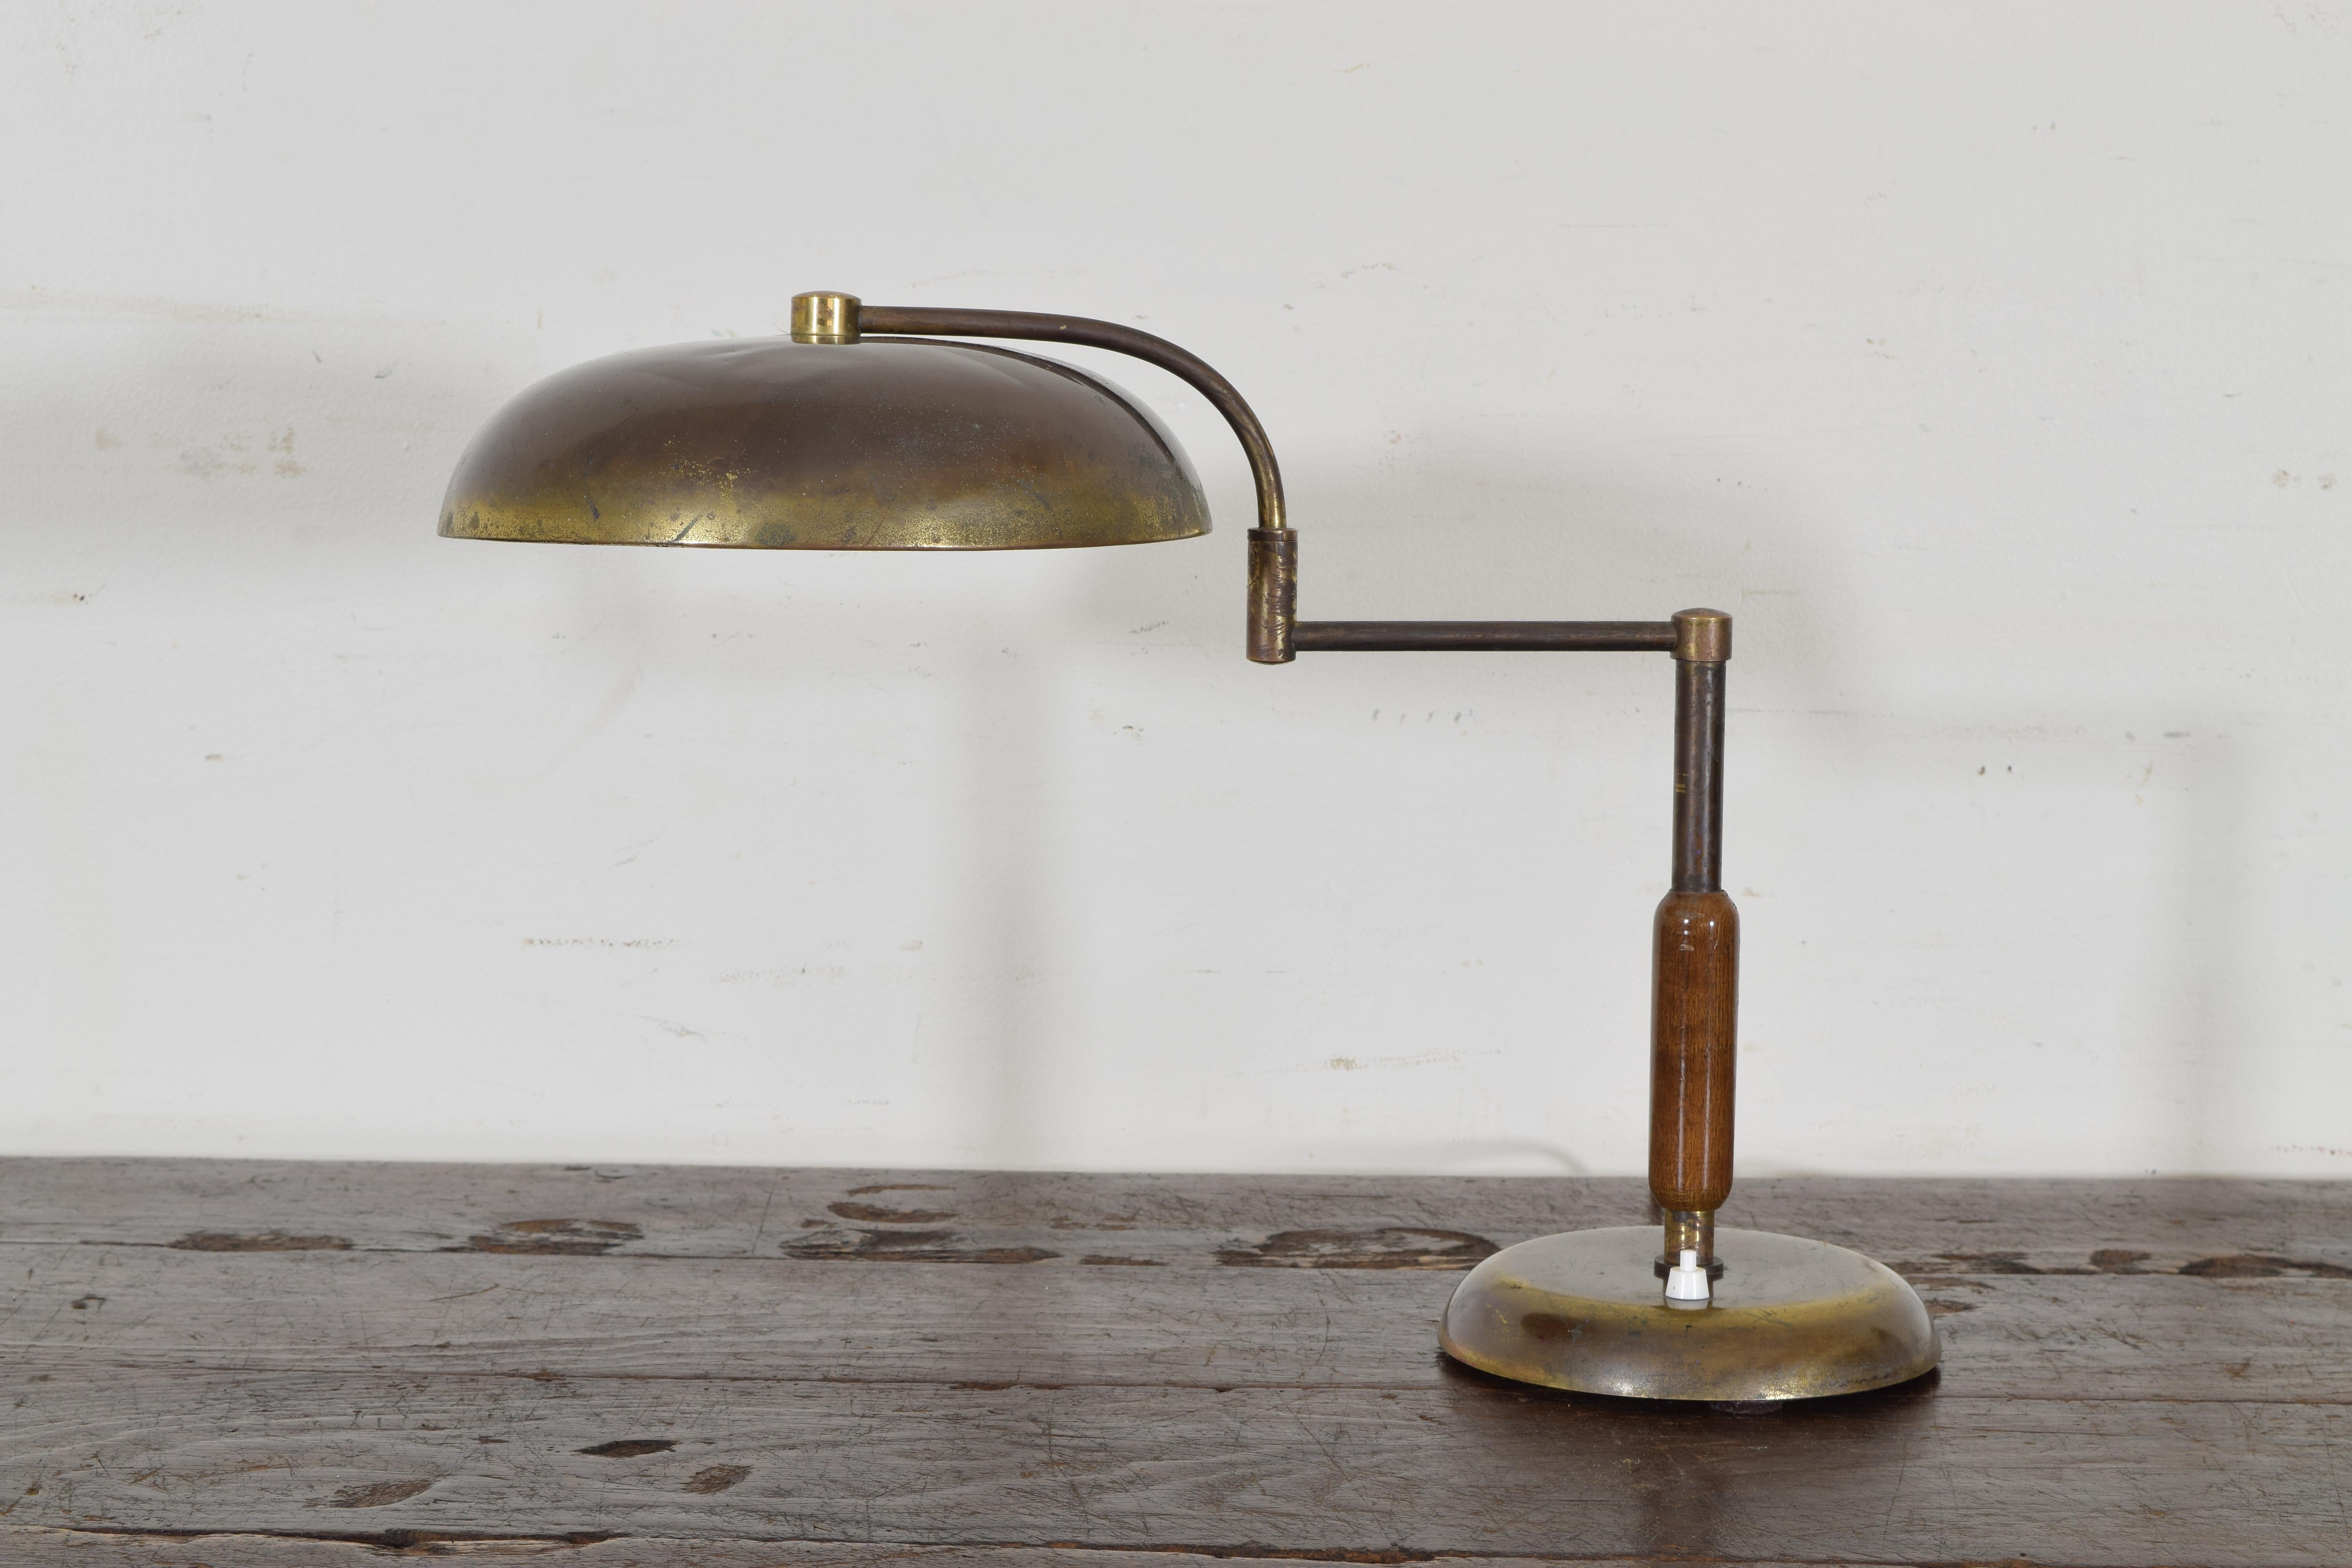 Now electrified for US, this table lamp is either French or Italian, brass with a wooden middle section, the arm adjustable.